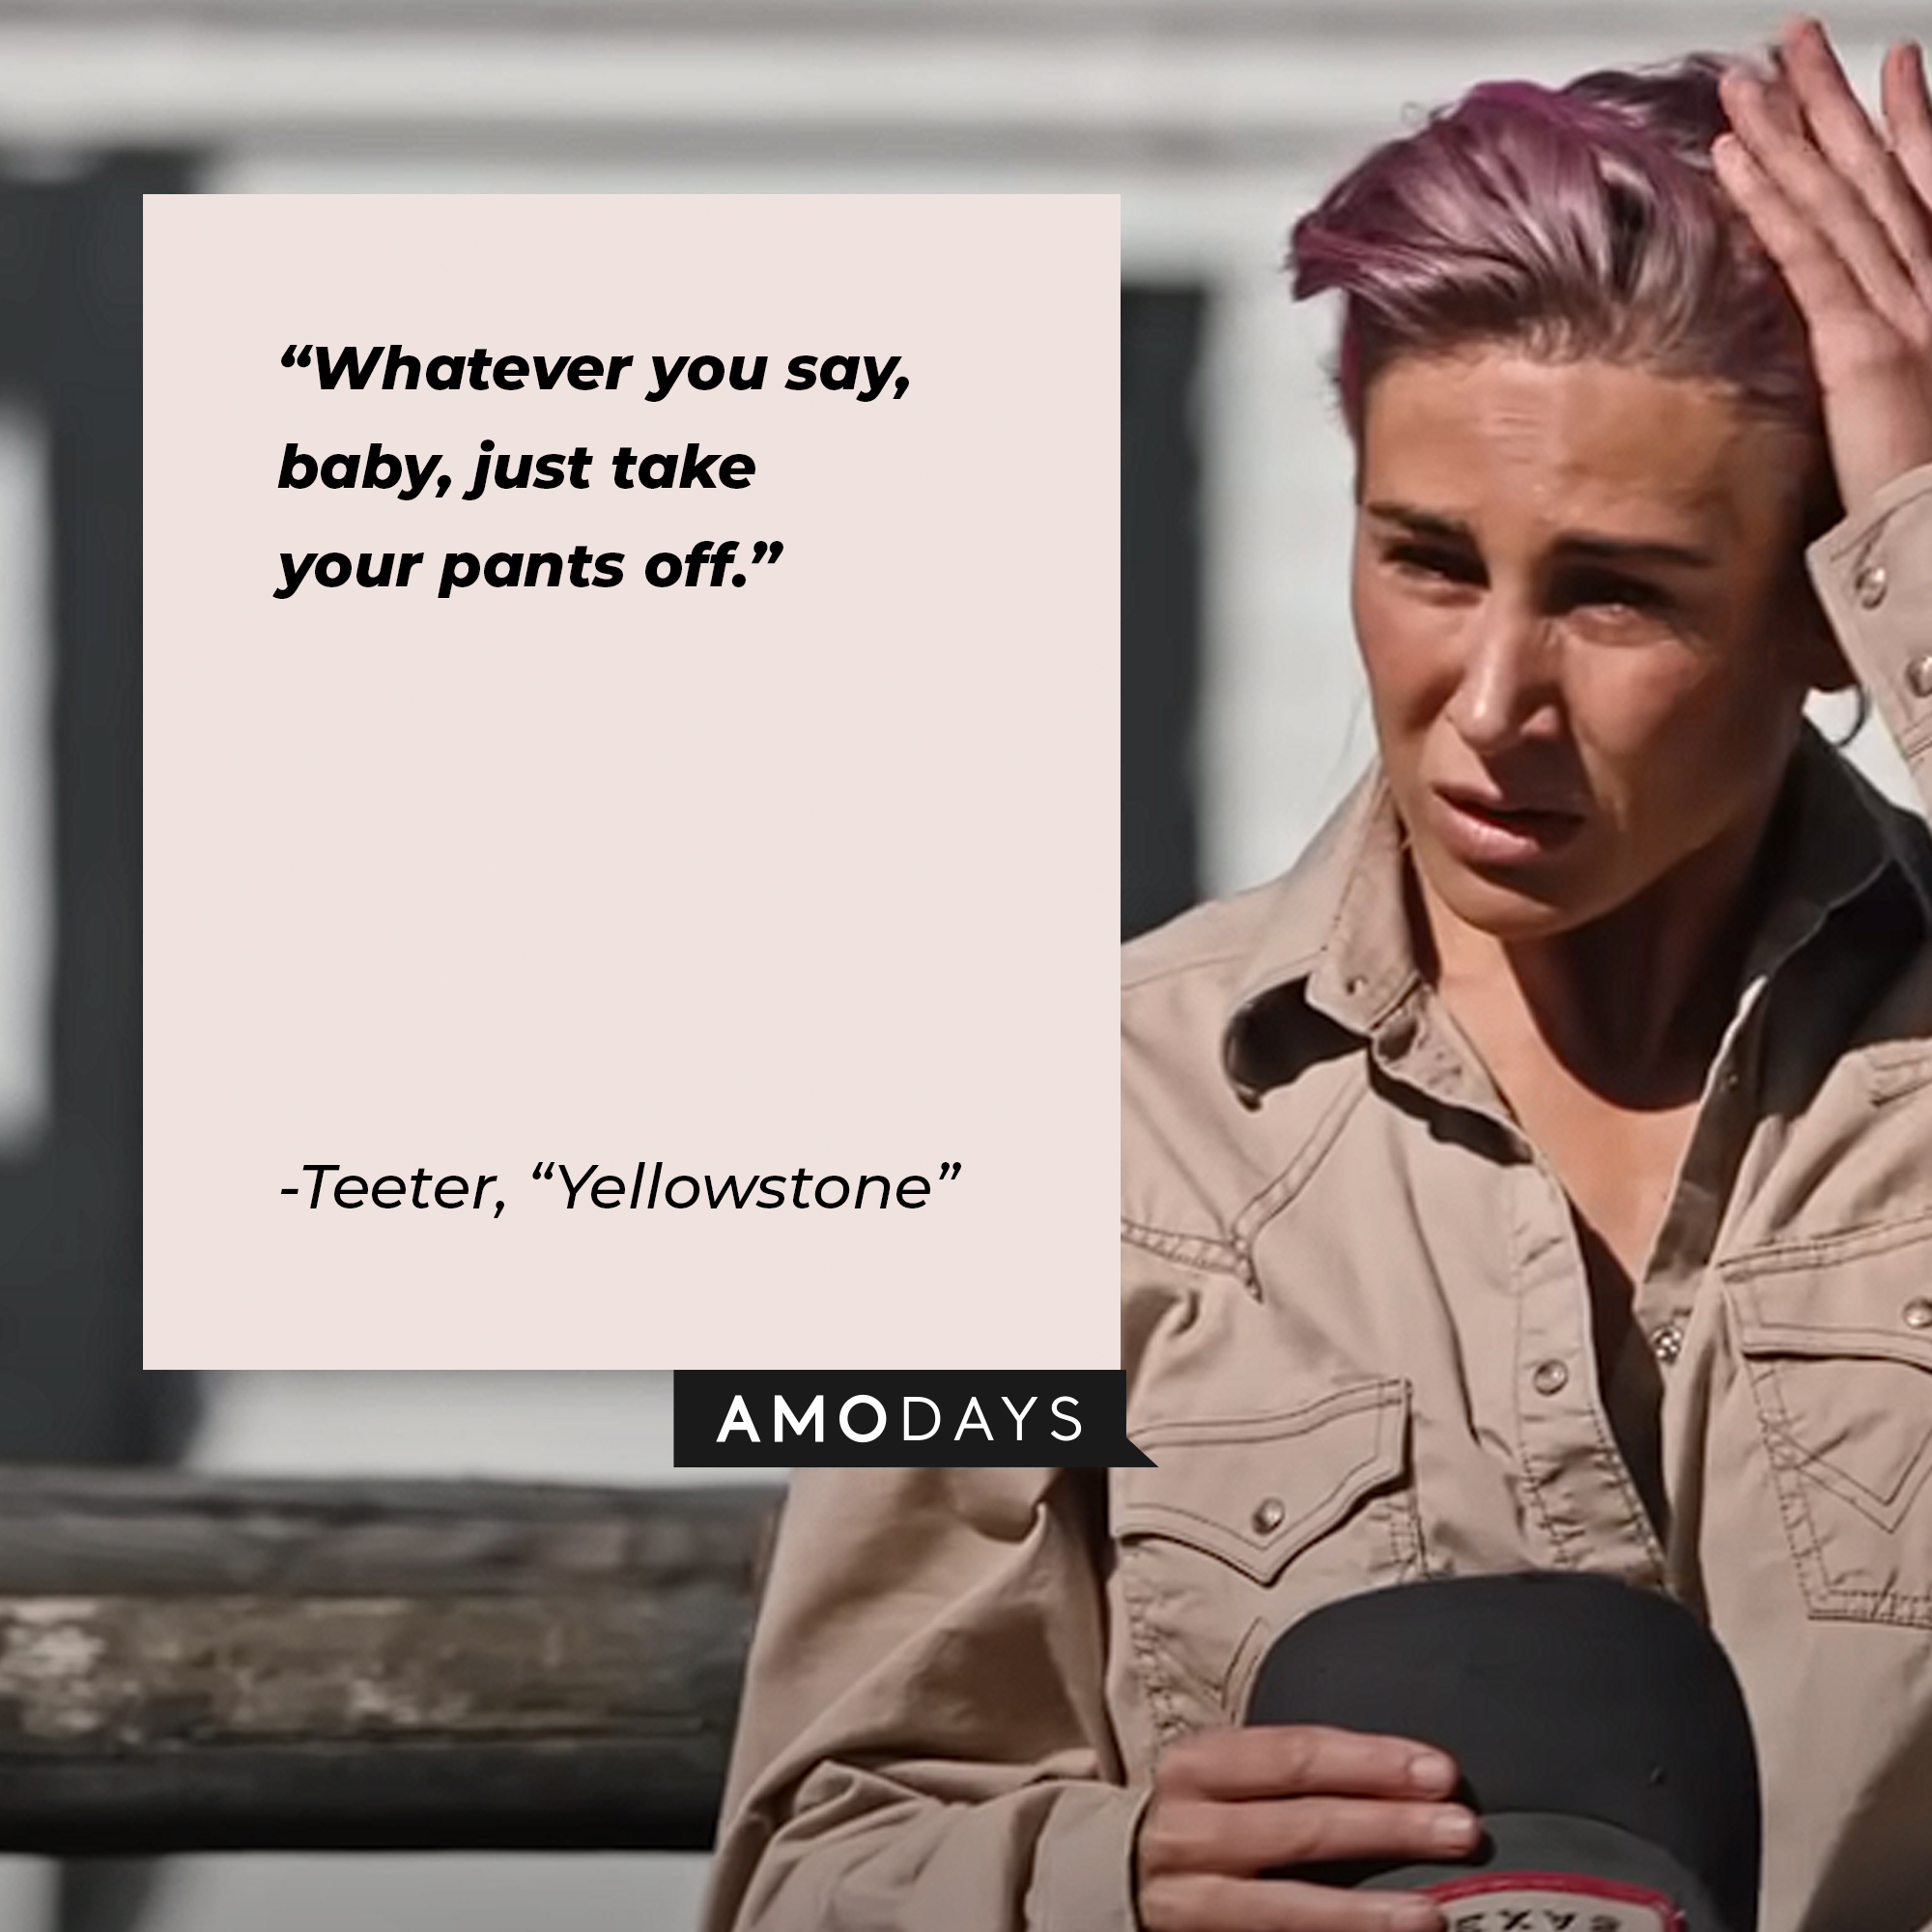 Teeter’s quote from “Yellowstone”: “Whatever you say, baby, just take your pants off.” | Source: youtube.com/yellowstone